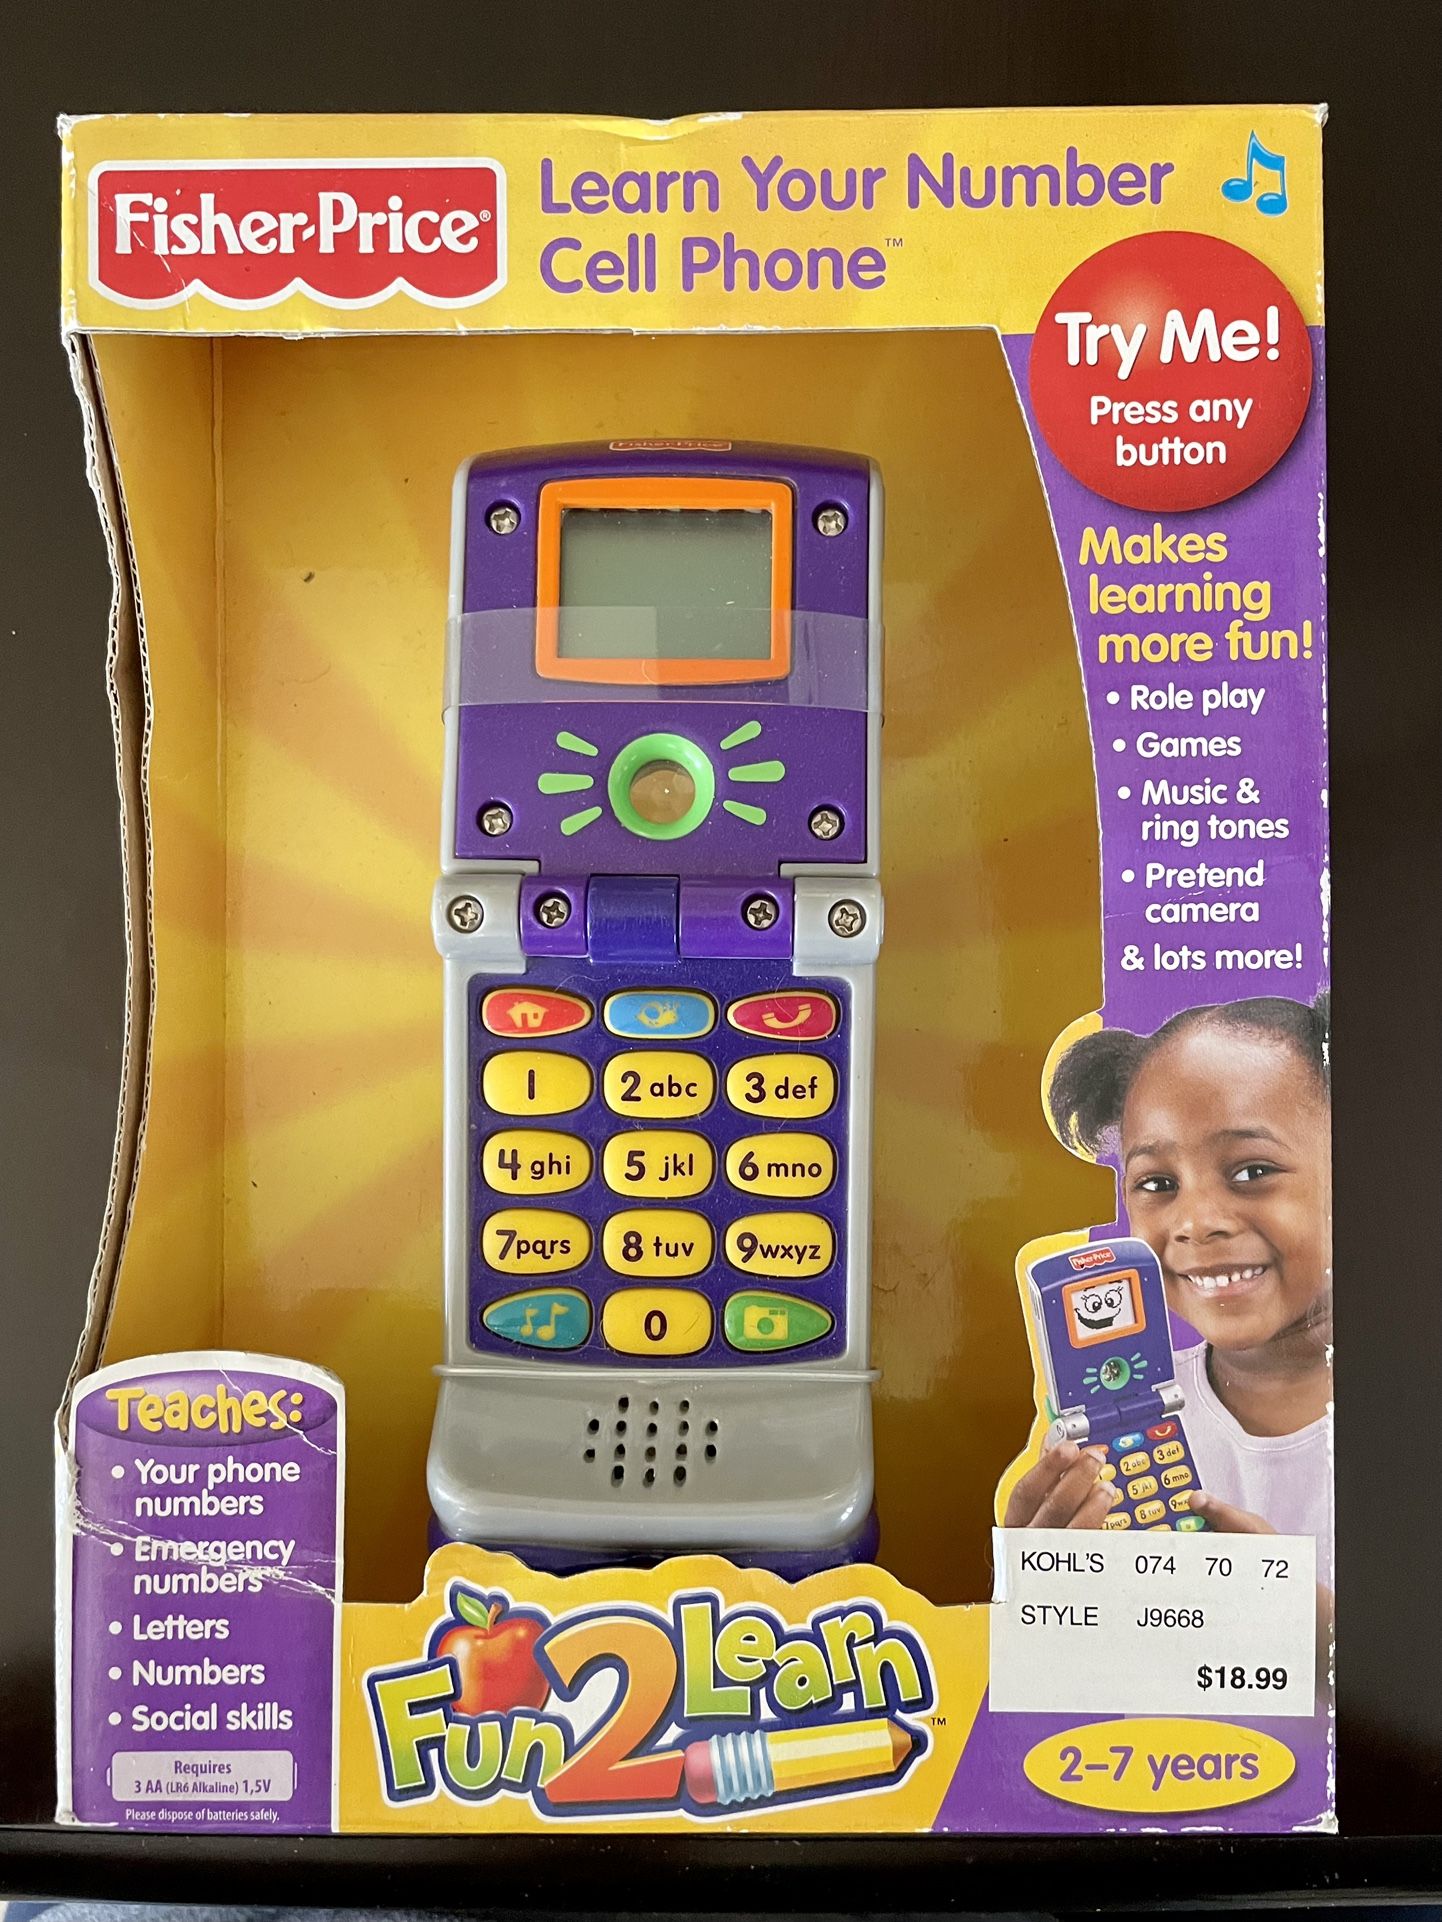 No, Fisher-Price learn your number, Cell phone